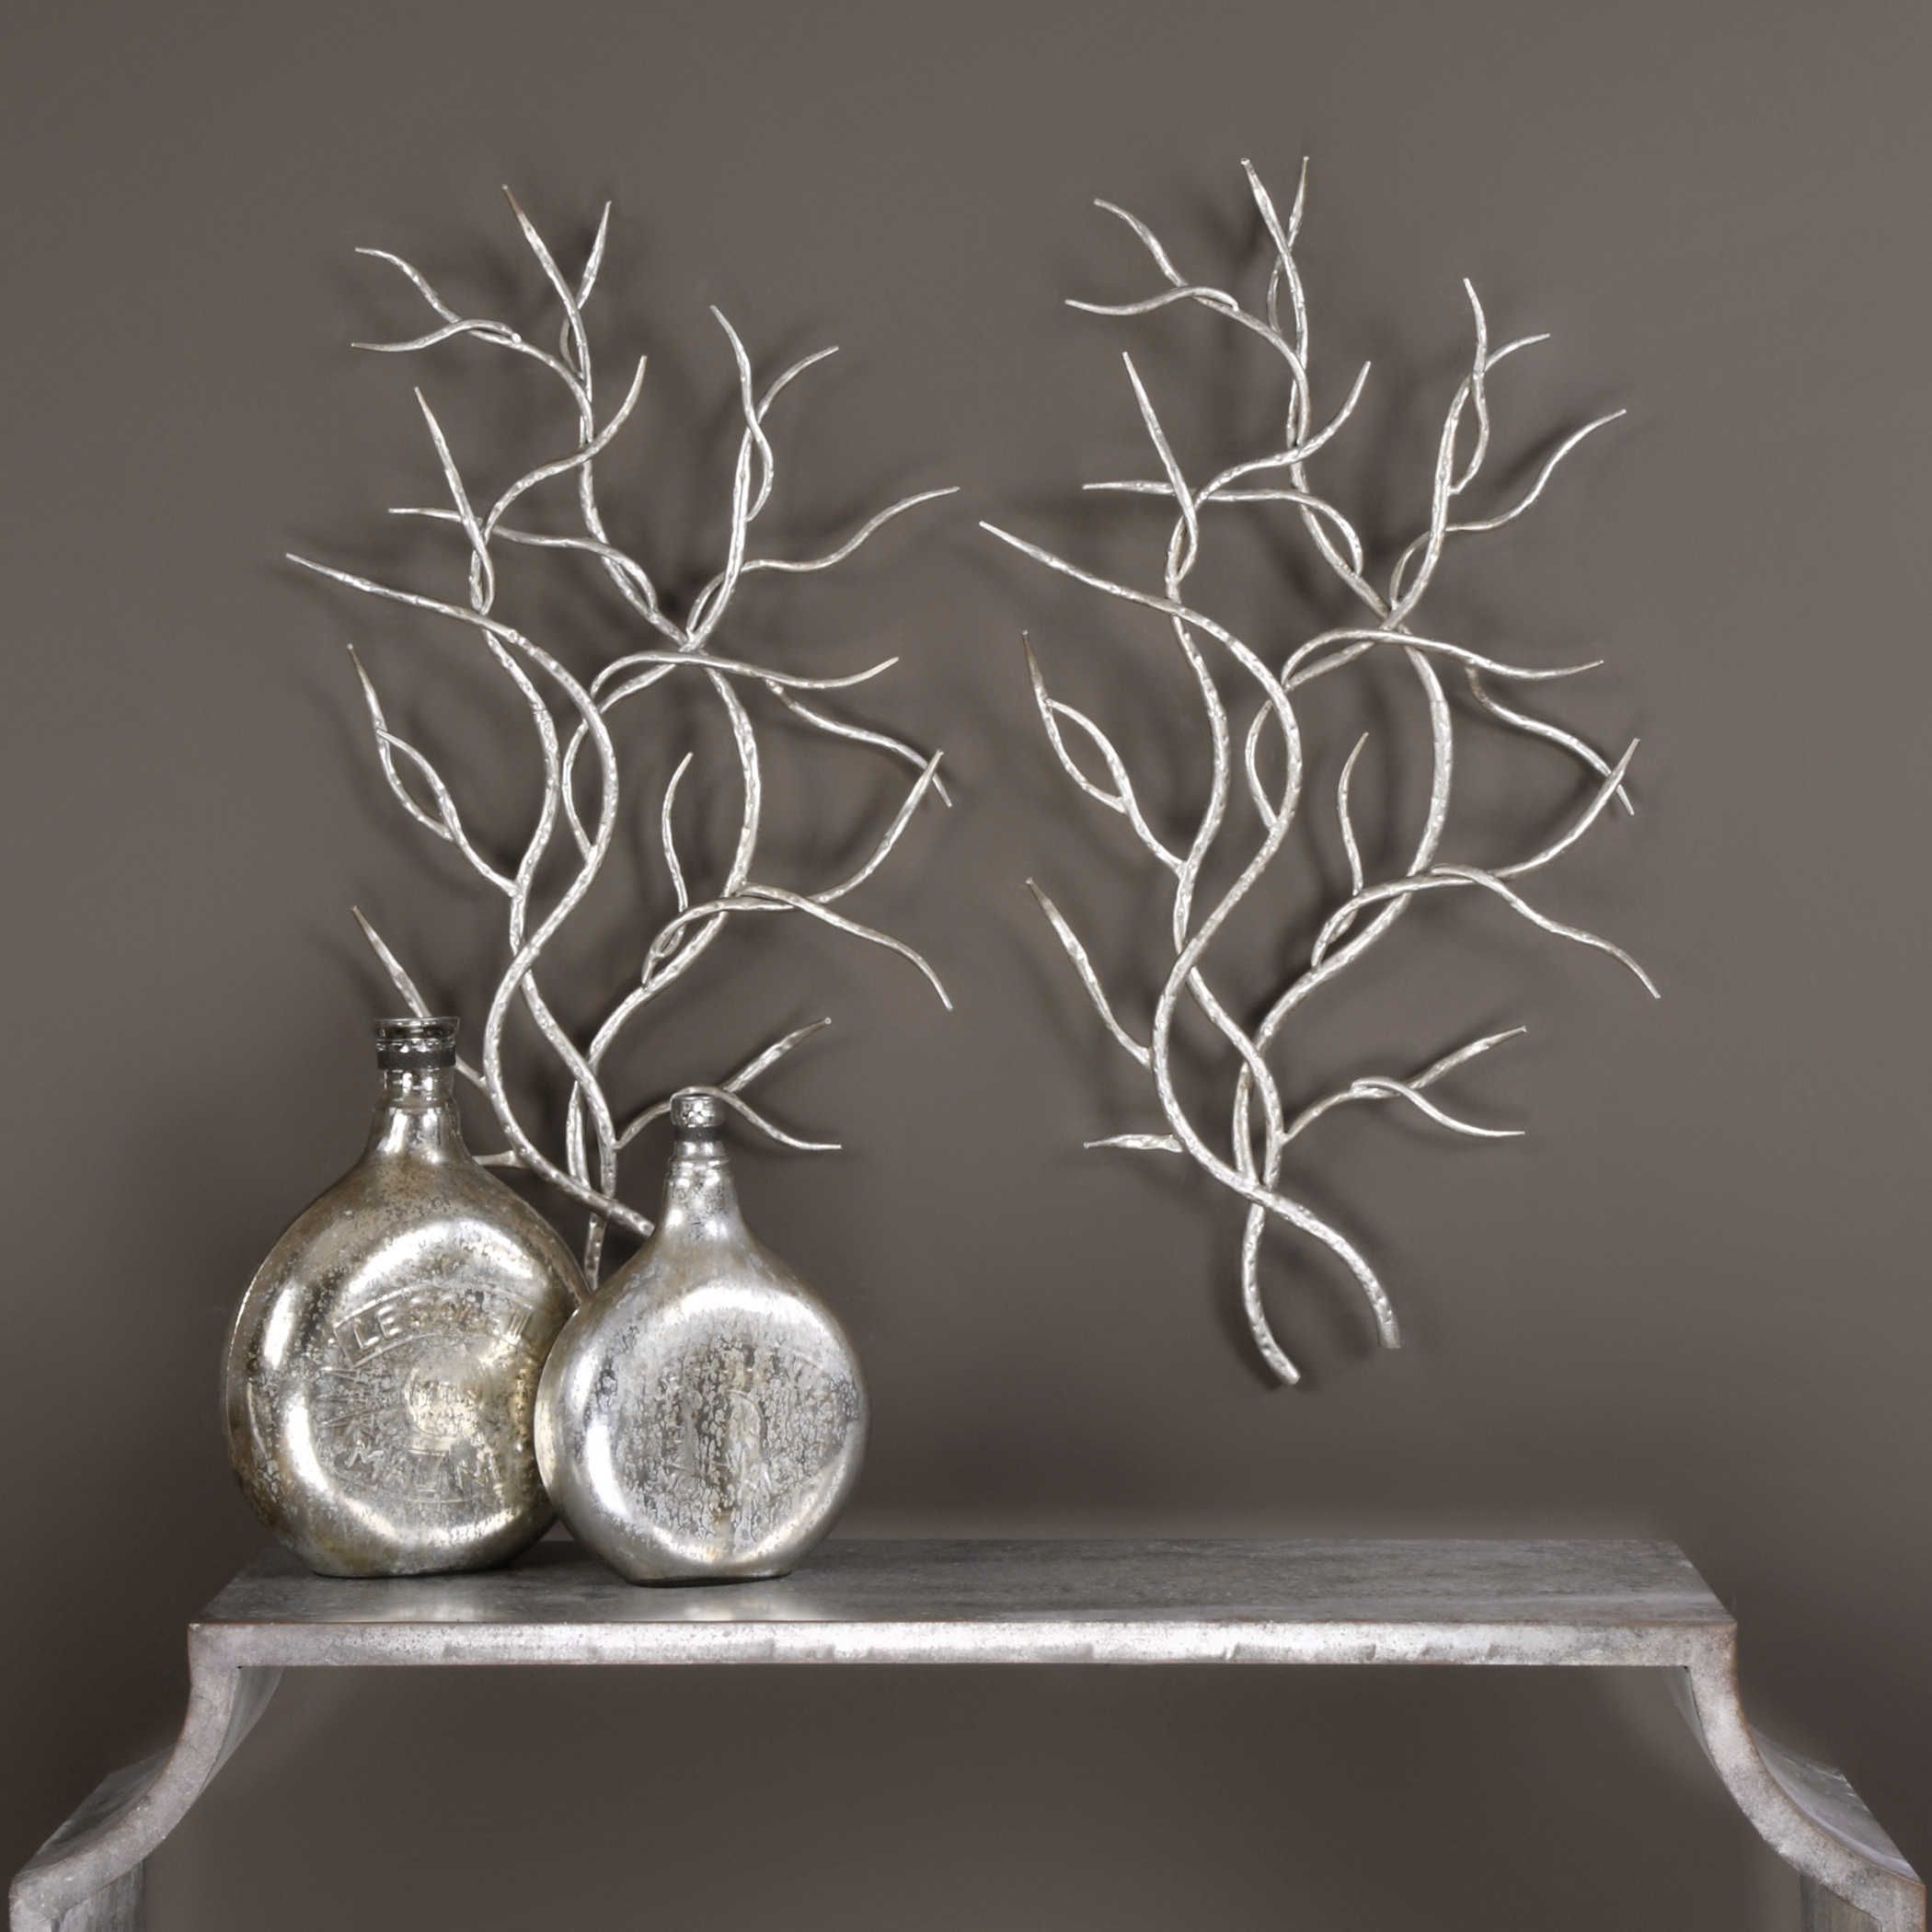 Silver Branches Metal Wall Decor, S/2 | Uttermost With Regard To Antique Silver Metal Wall Art Sculptures (View 14 of 15)